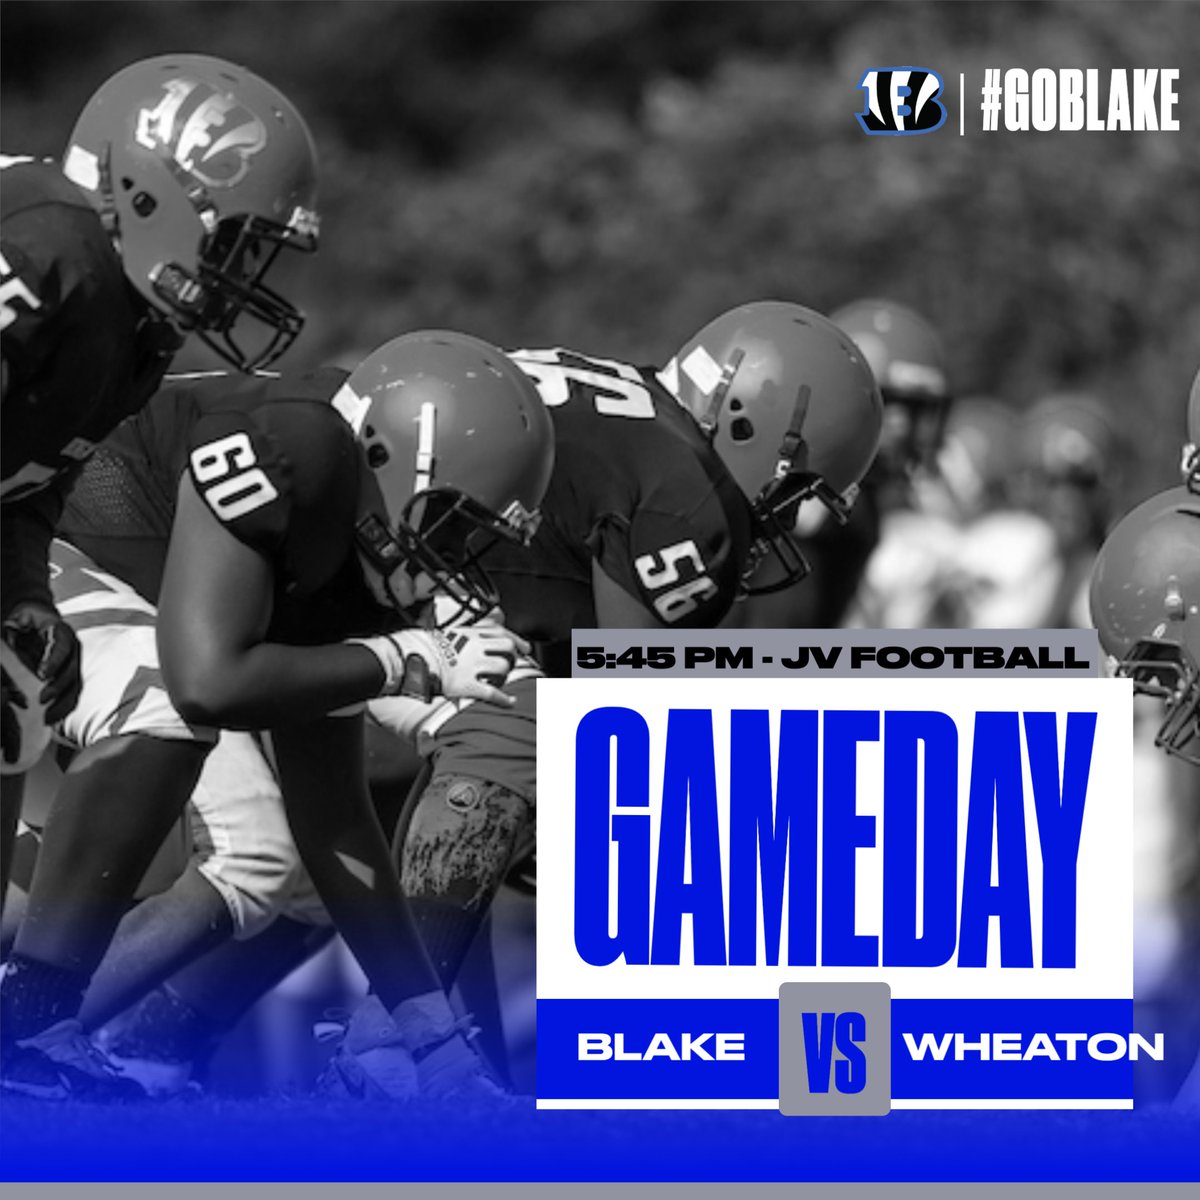 Monday Night Football! Blake hosts Wheaton in JV Football tonight at 5:45pm. Tickets are available at GoFan. Come out and support the Bengals in the final home game for JV Football/Cheer.